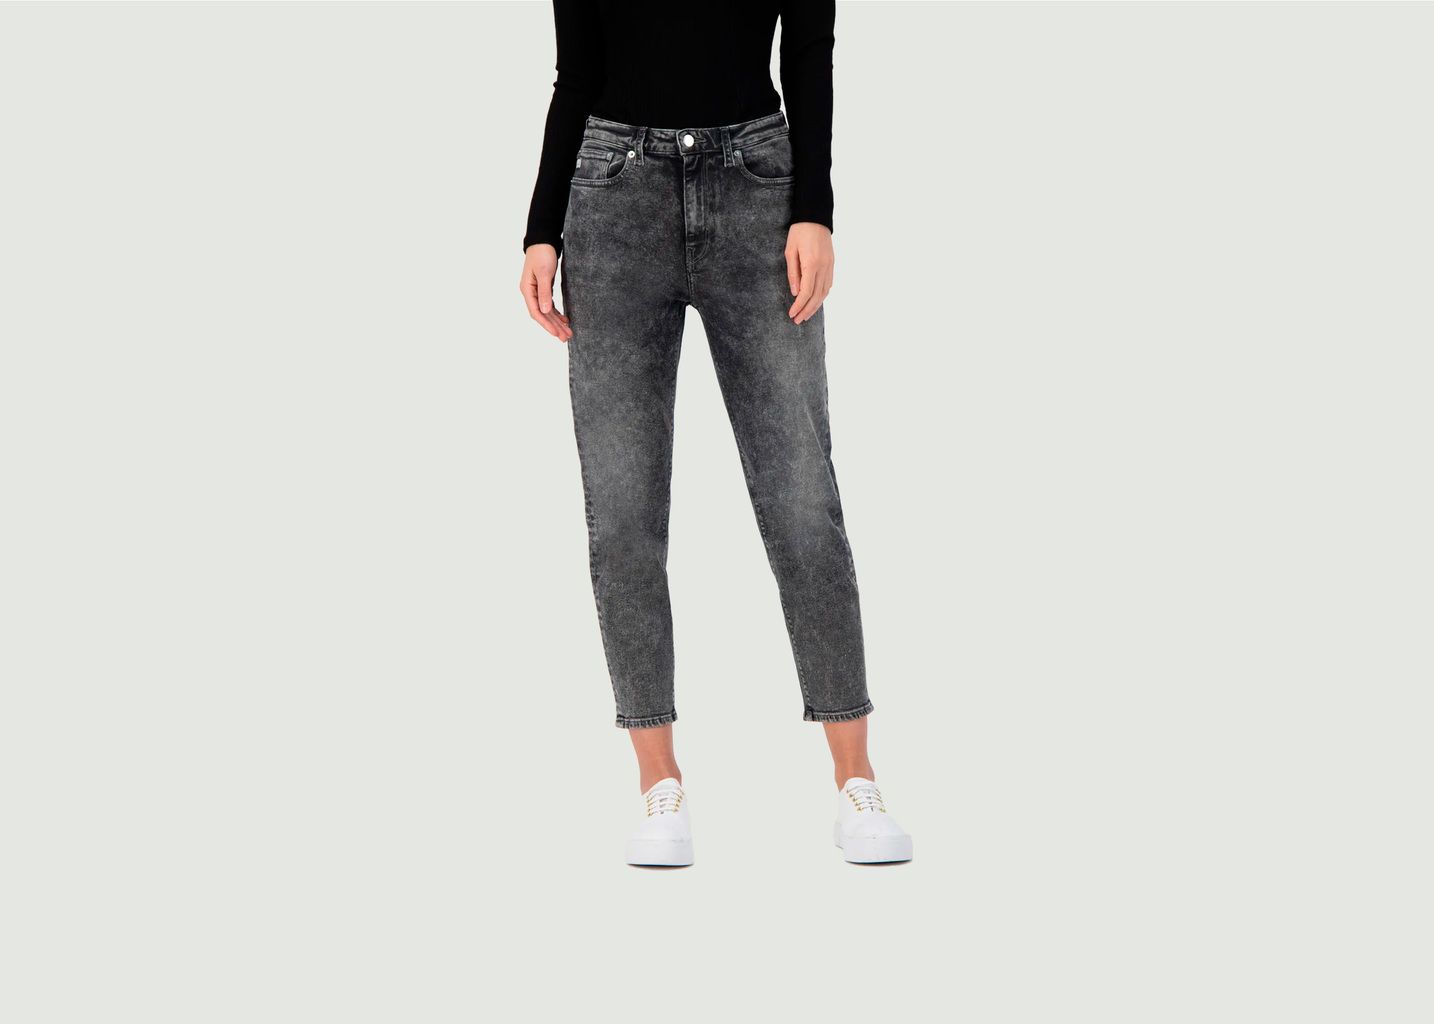 Jean Mams Stretch Tapered - Mud Jeans